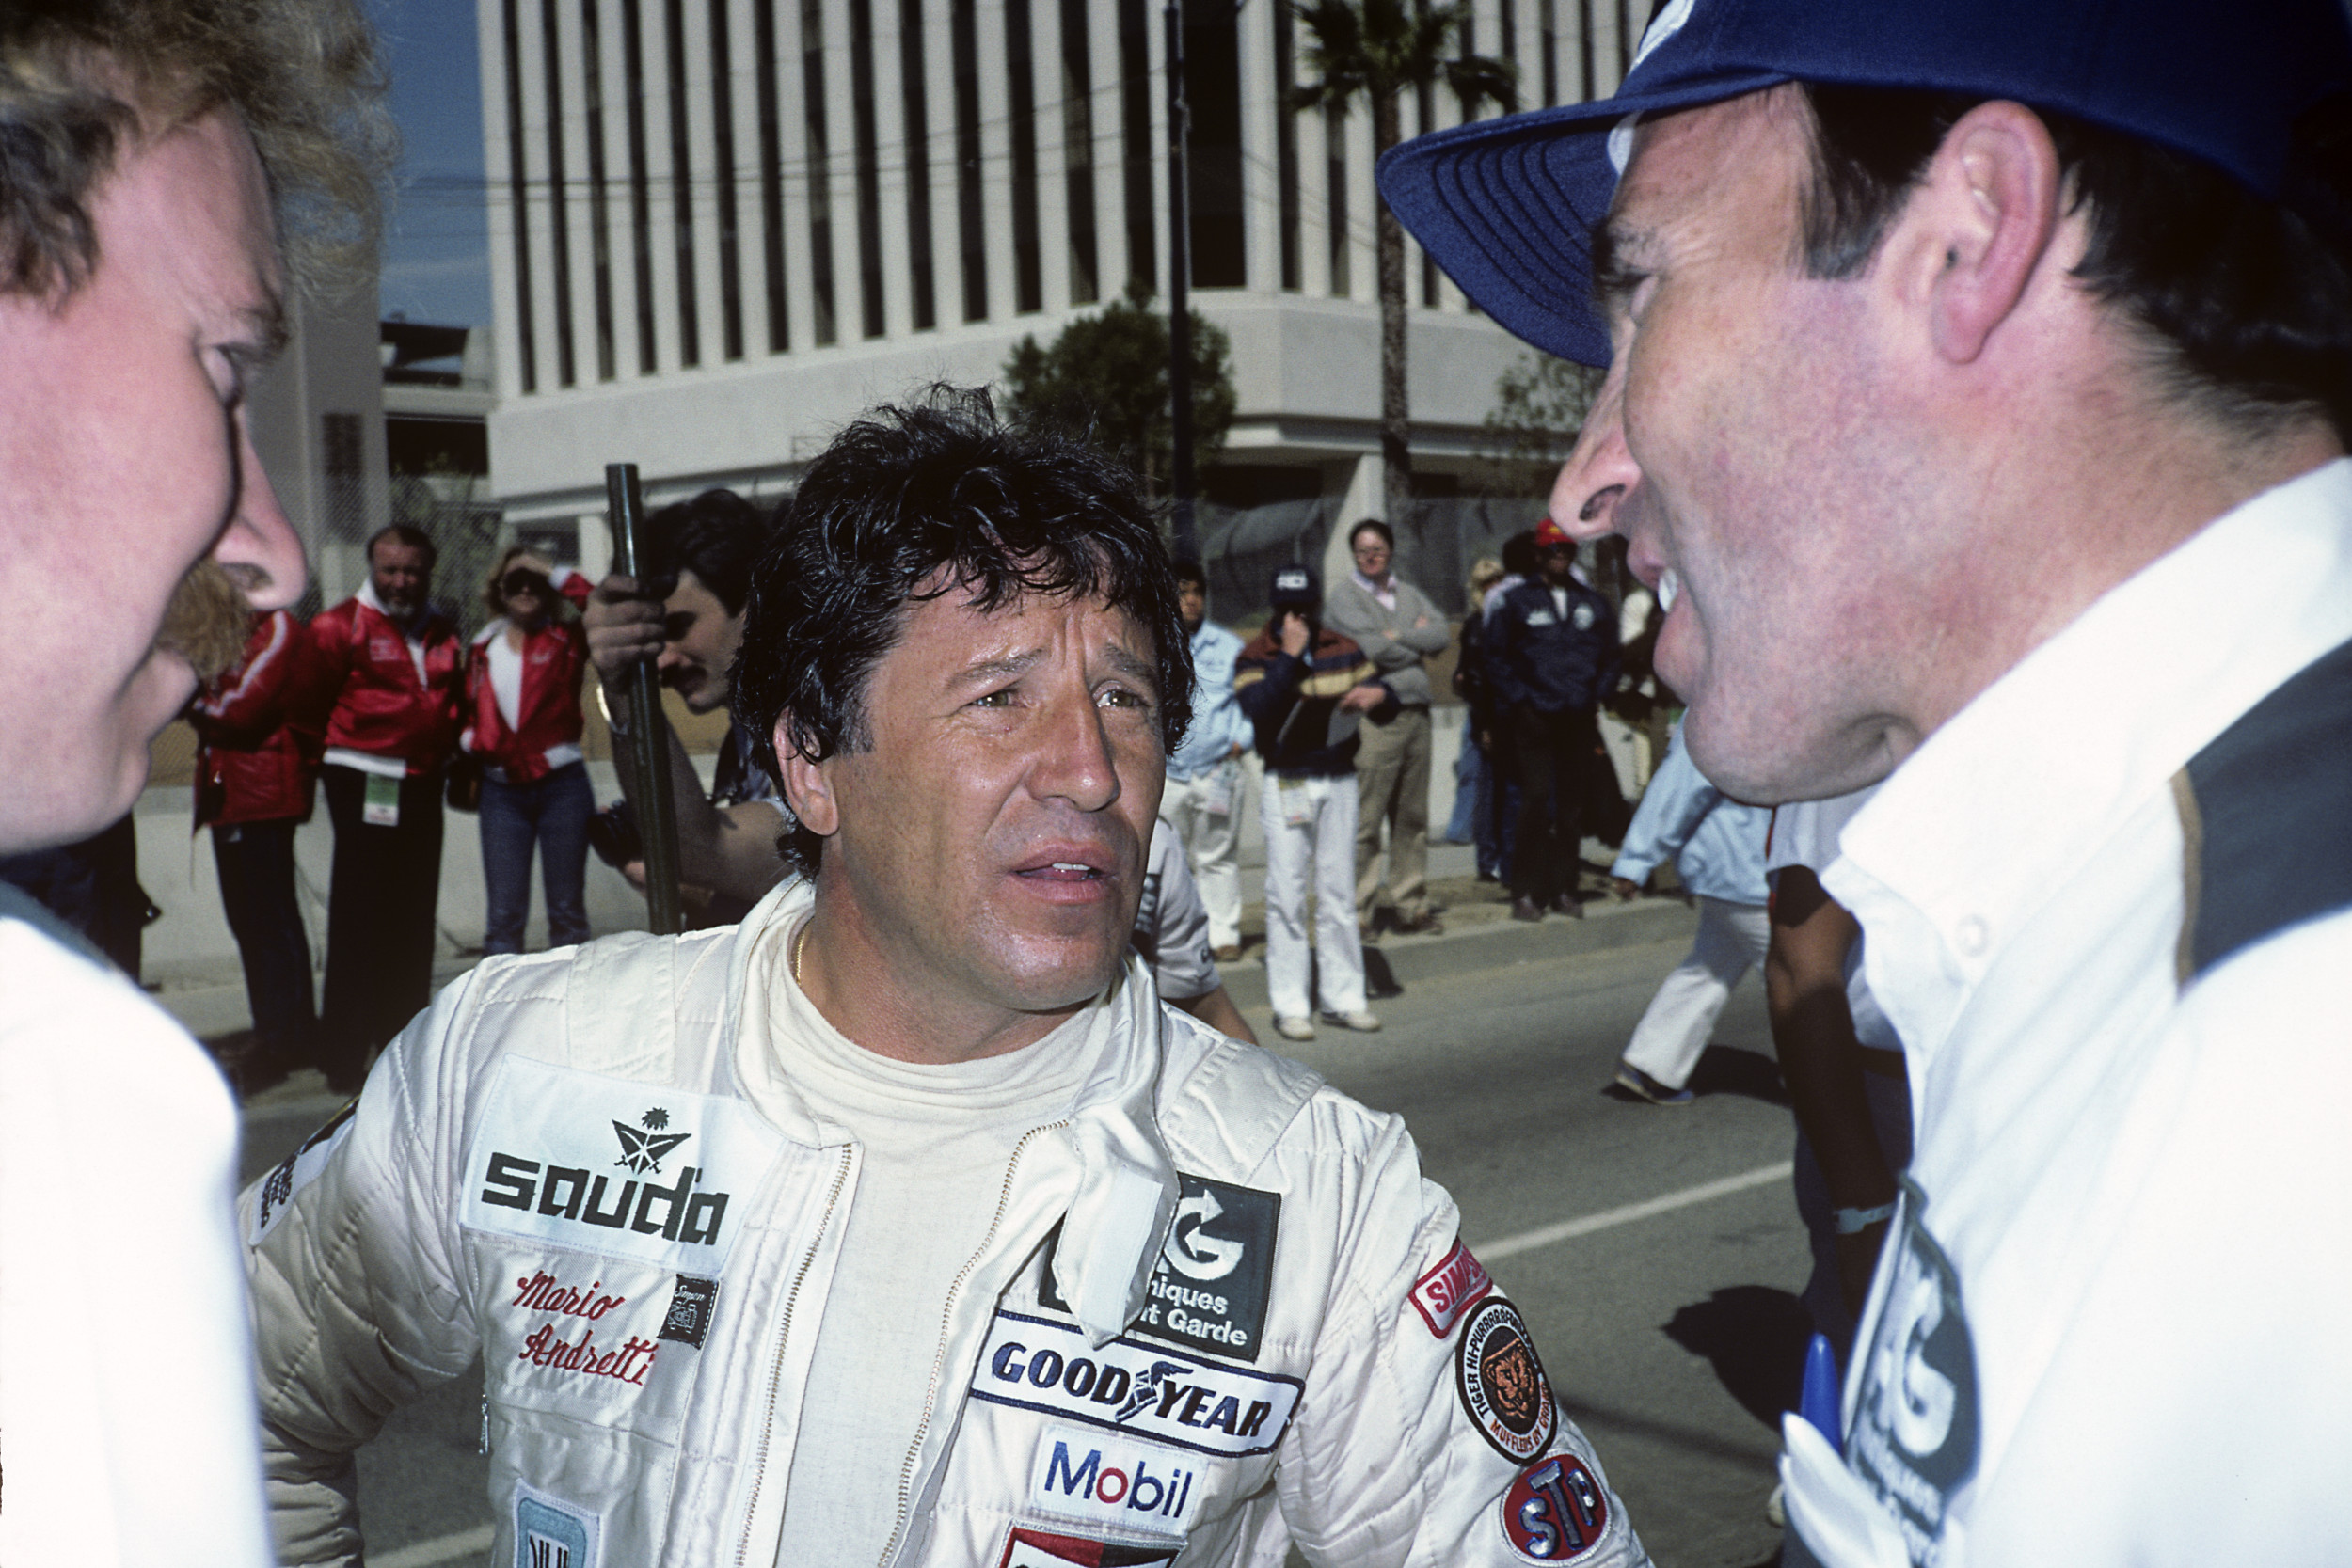 Mario Andretti shares a heart-warming story about Frank Williams